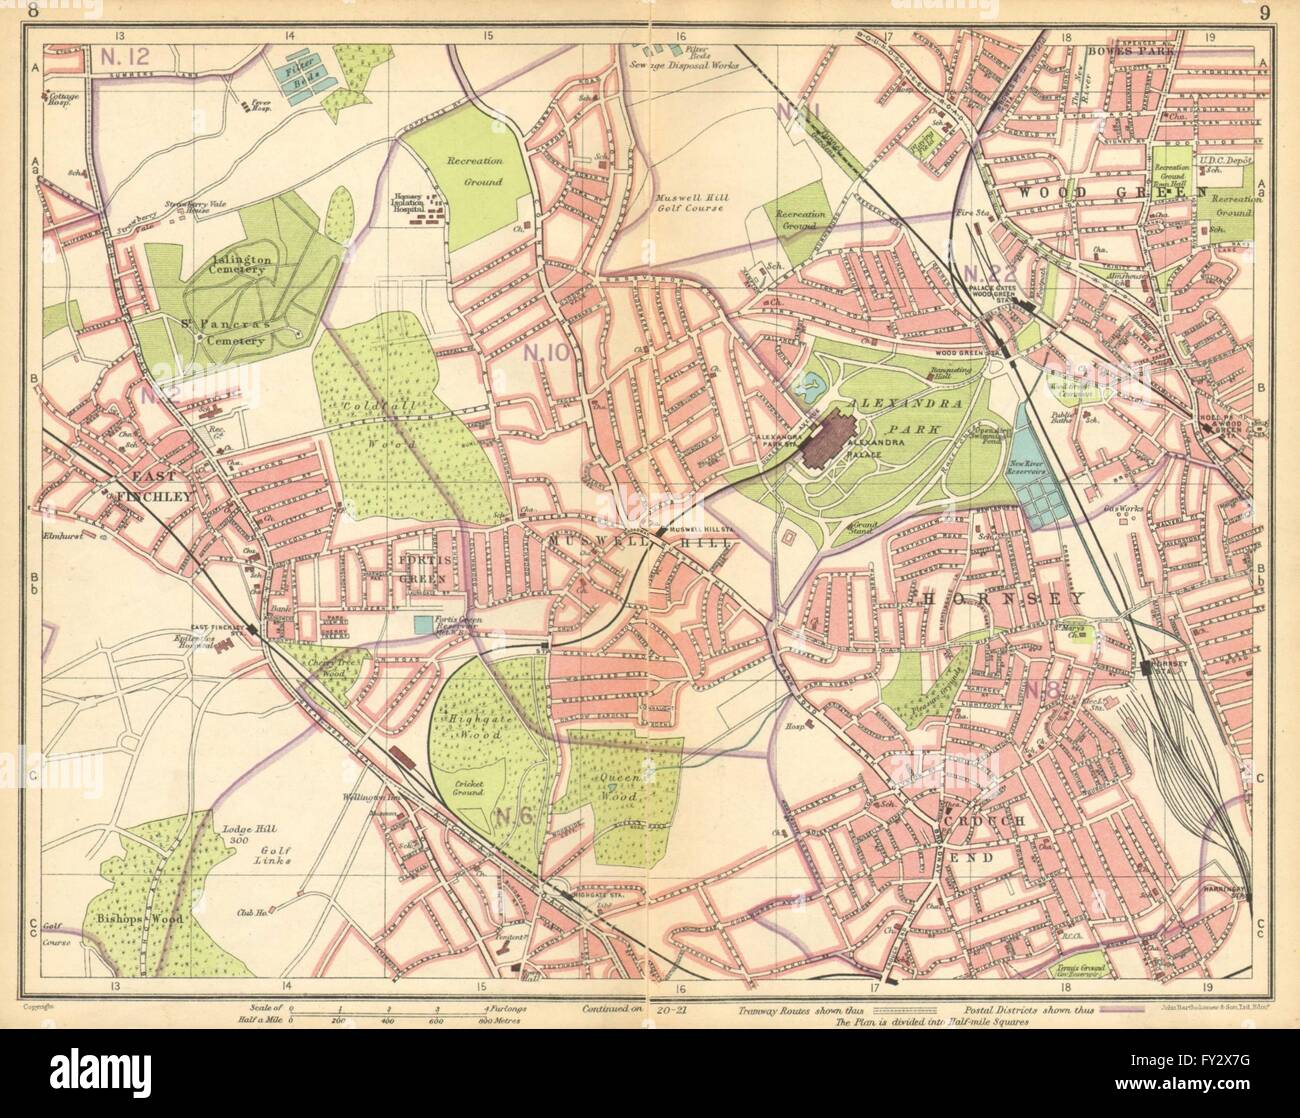 LONDON N: Muswell Hill Alexandra Park Wood Green Finchley Crouch End, 1925 map Stock Photo